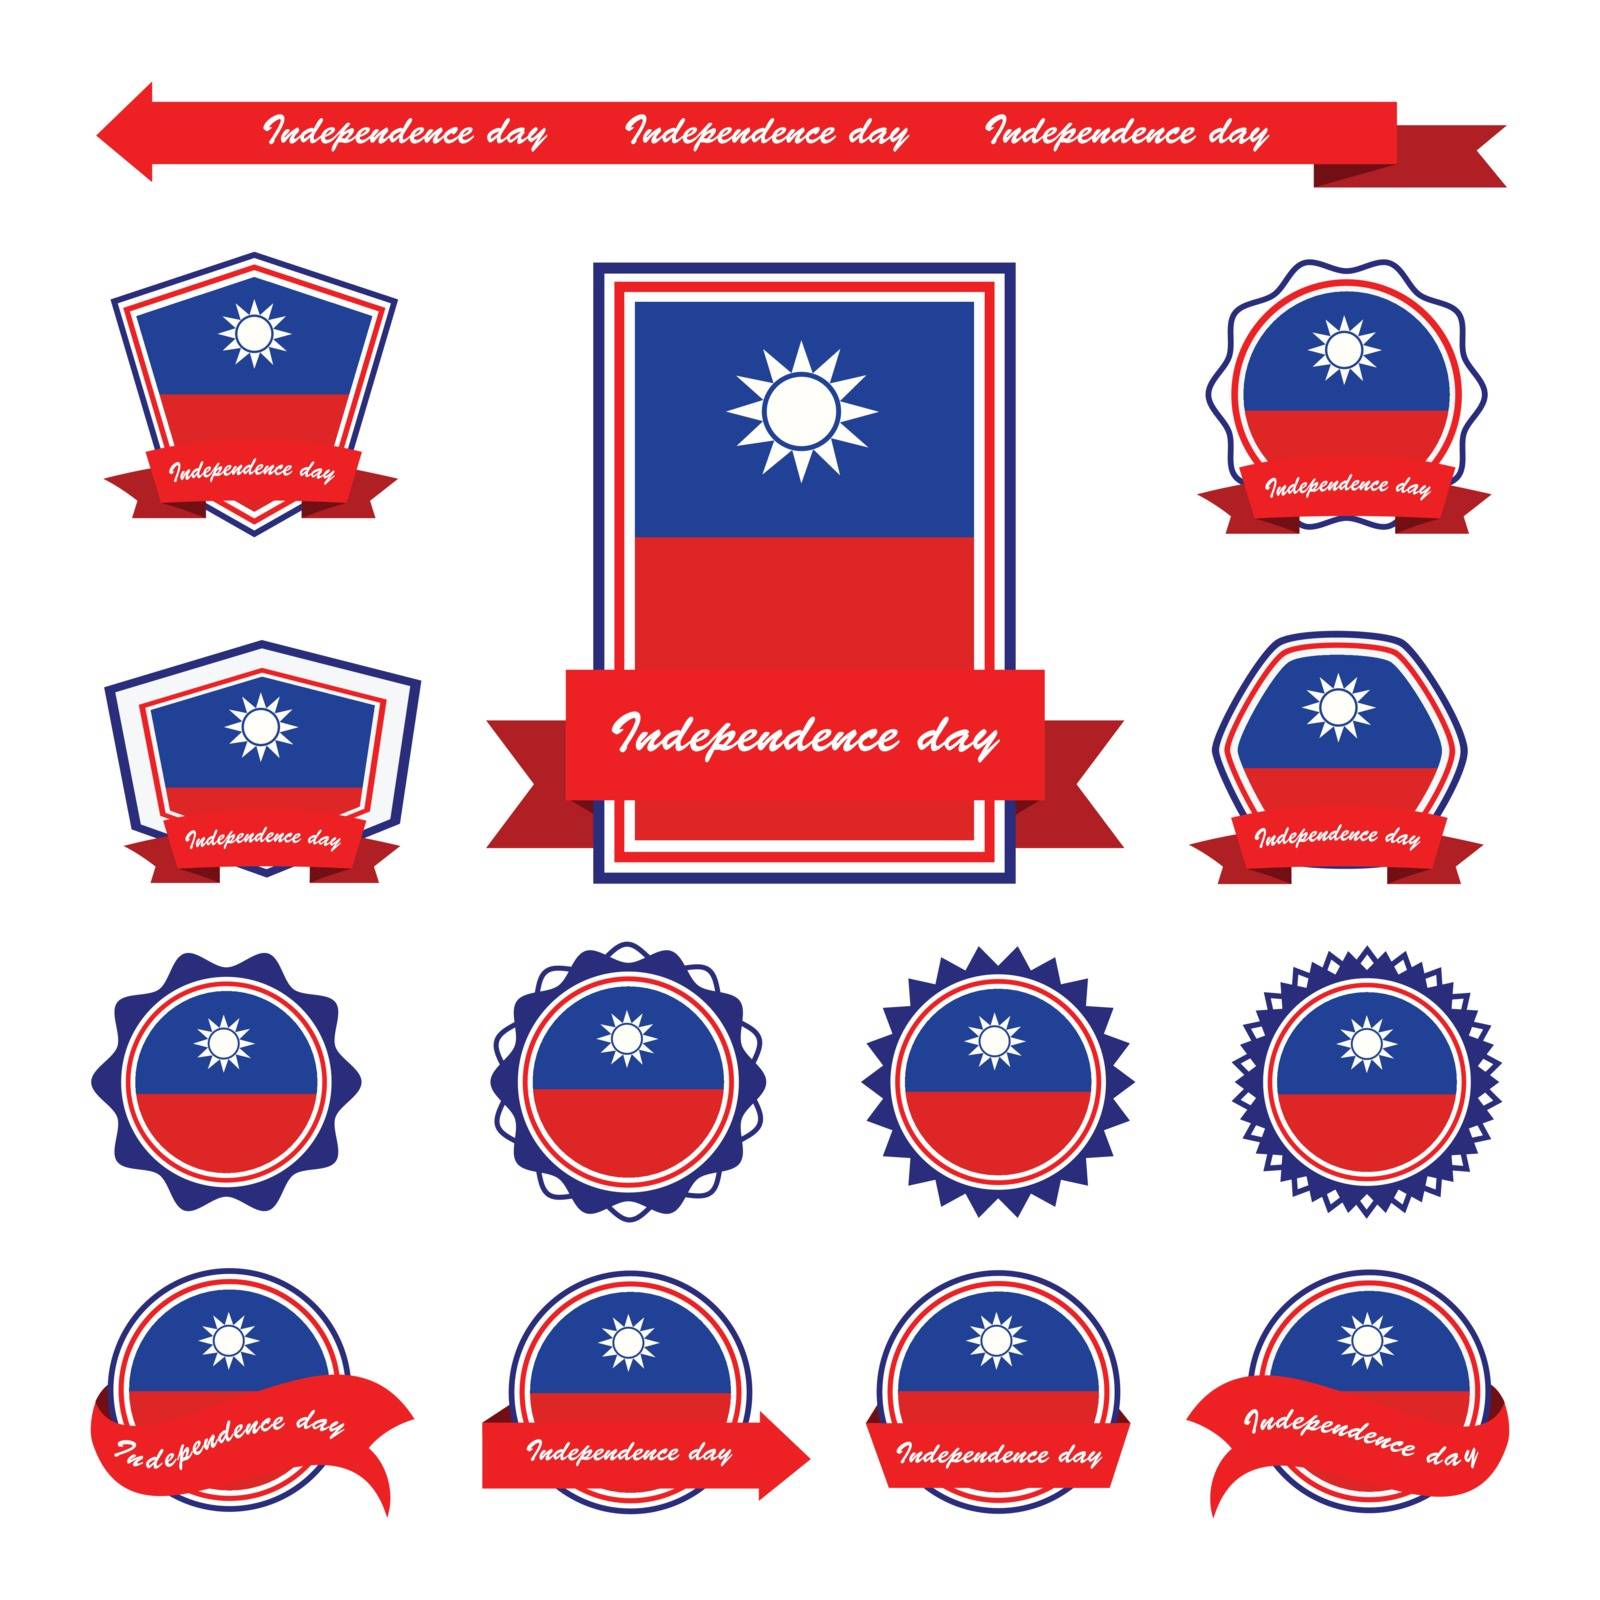 taiwan independence day flags infographic design